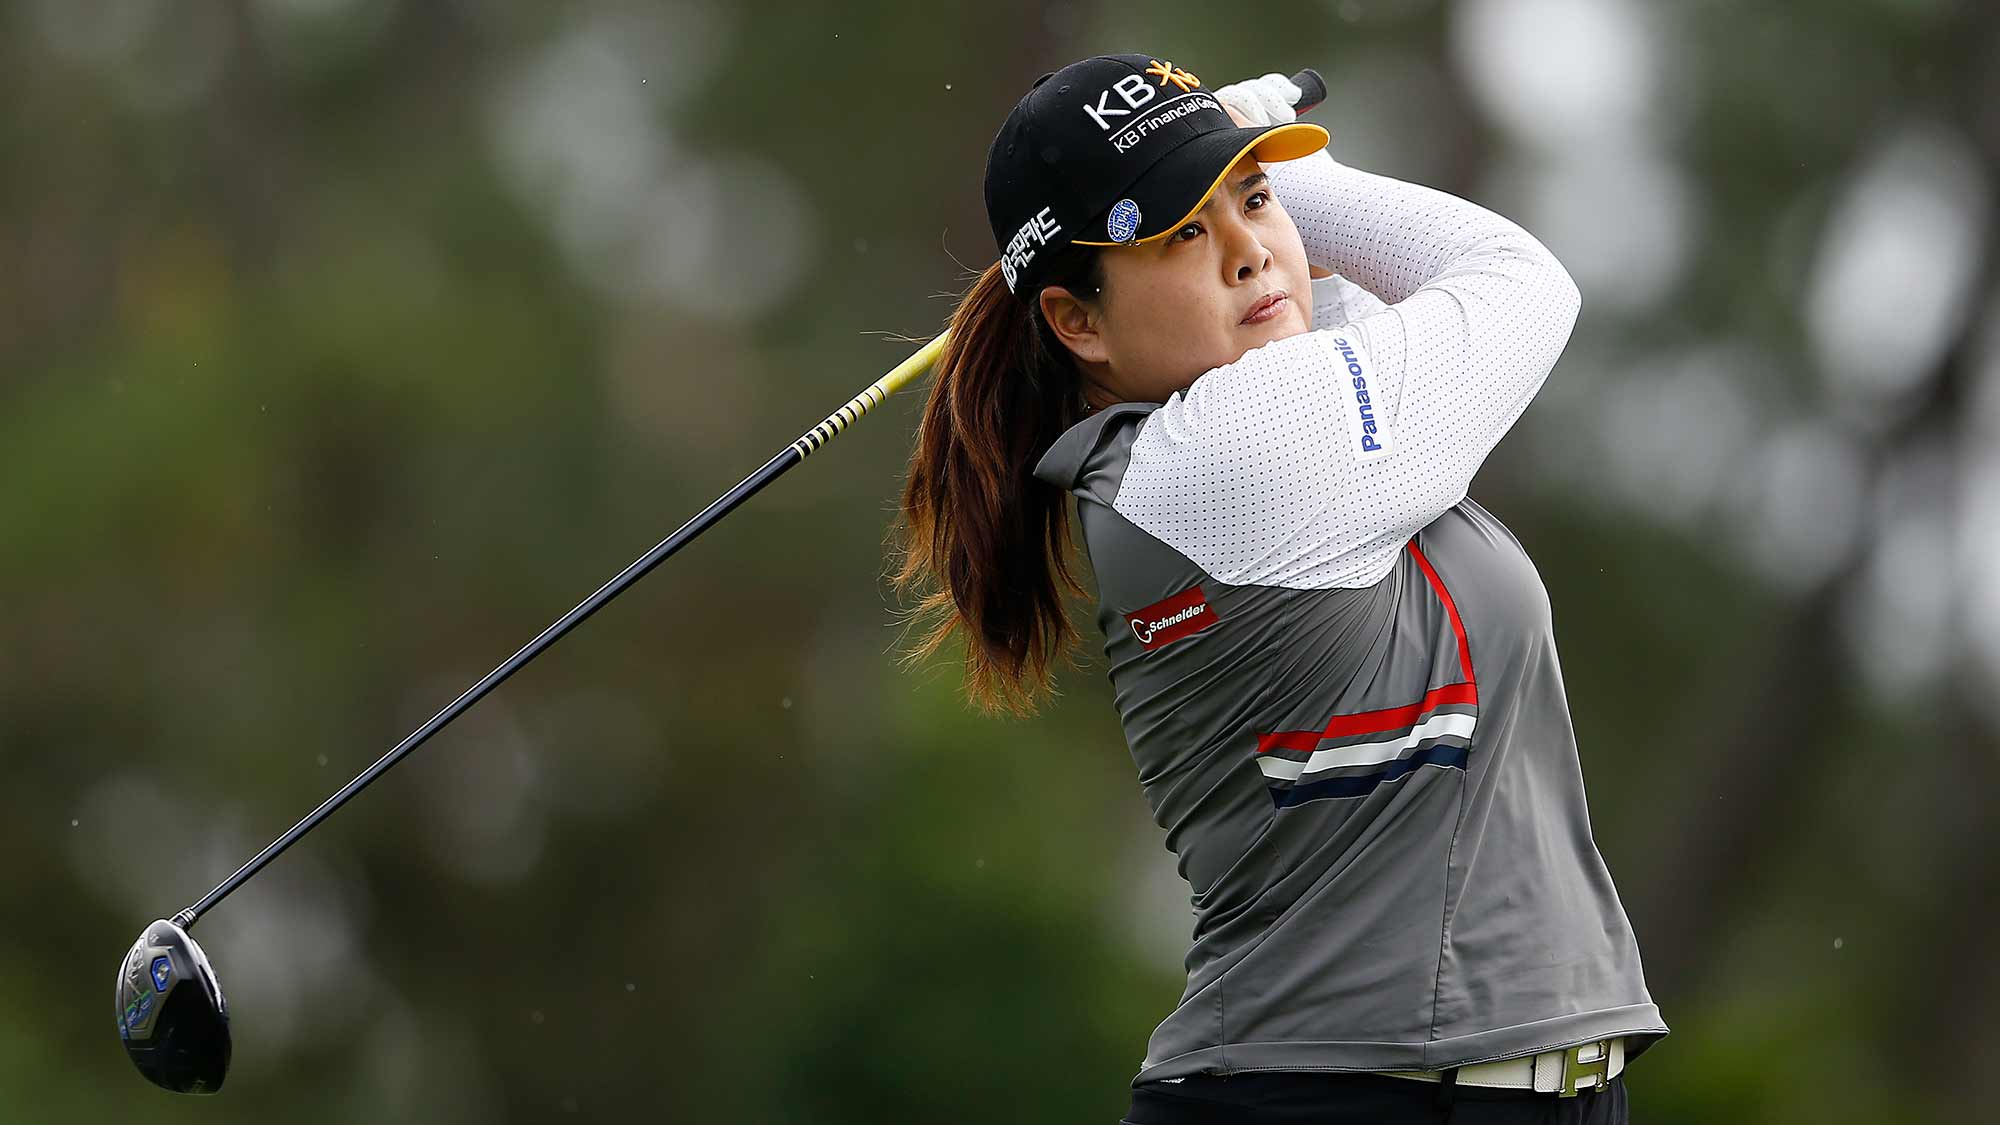 Inbee Park of South Korea plays her shot from the seventh tee during the final round of the Diamond Resorts Tournament of Champions at Tranquilo Golf Course at Four Seasons Golf and Sports Club Orlando on January 19, 2020 in Lake Buena Vista, Florida